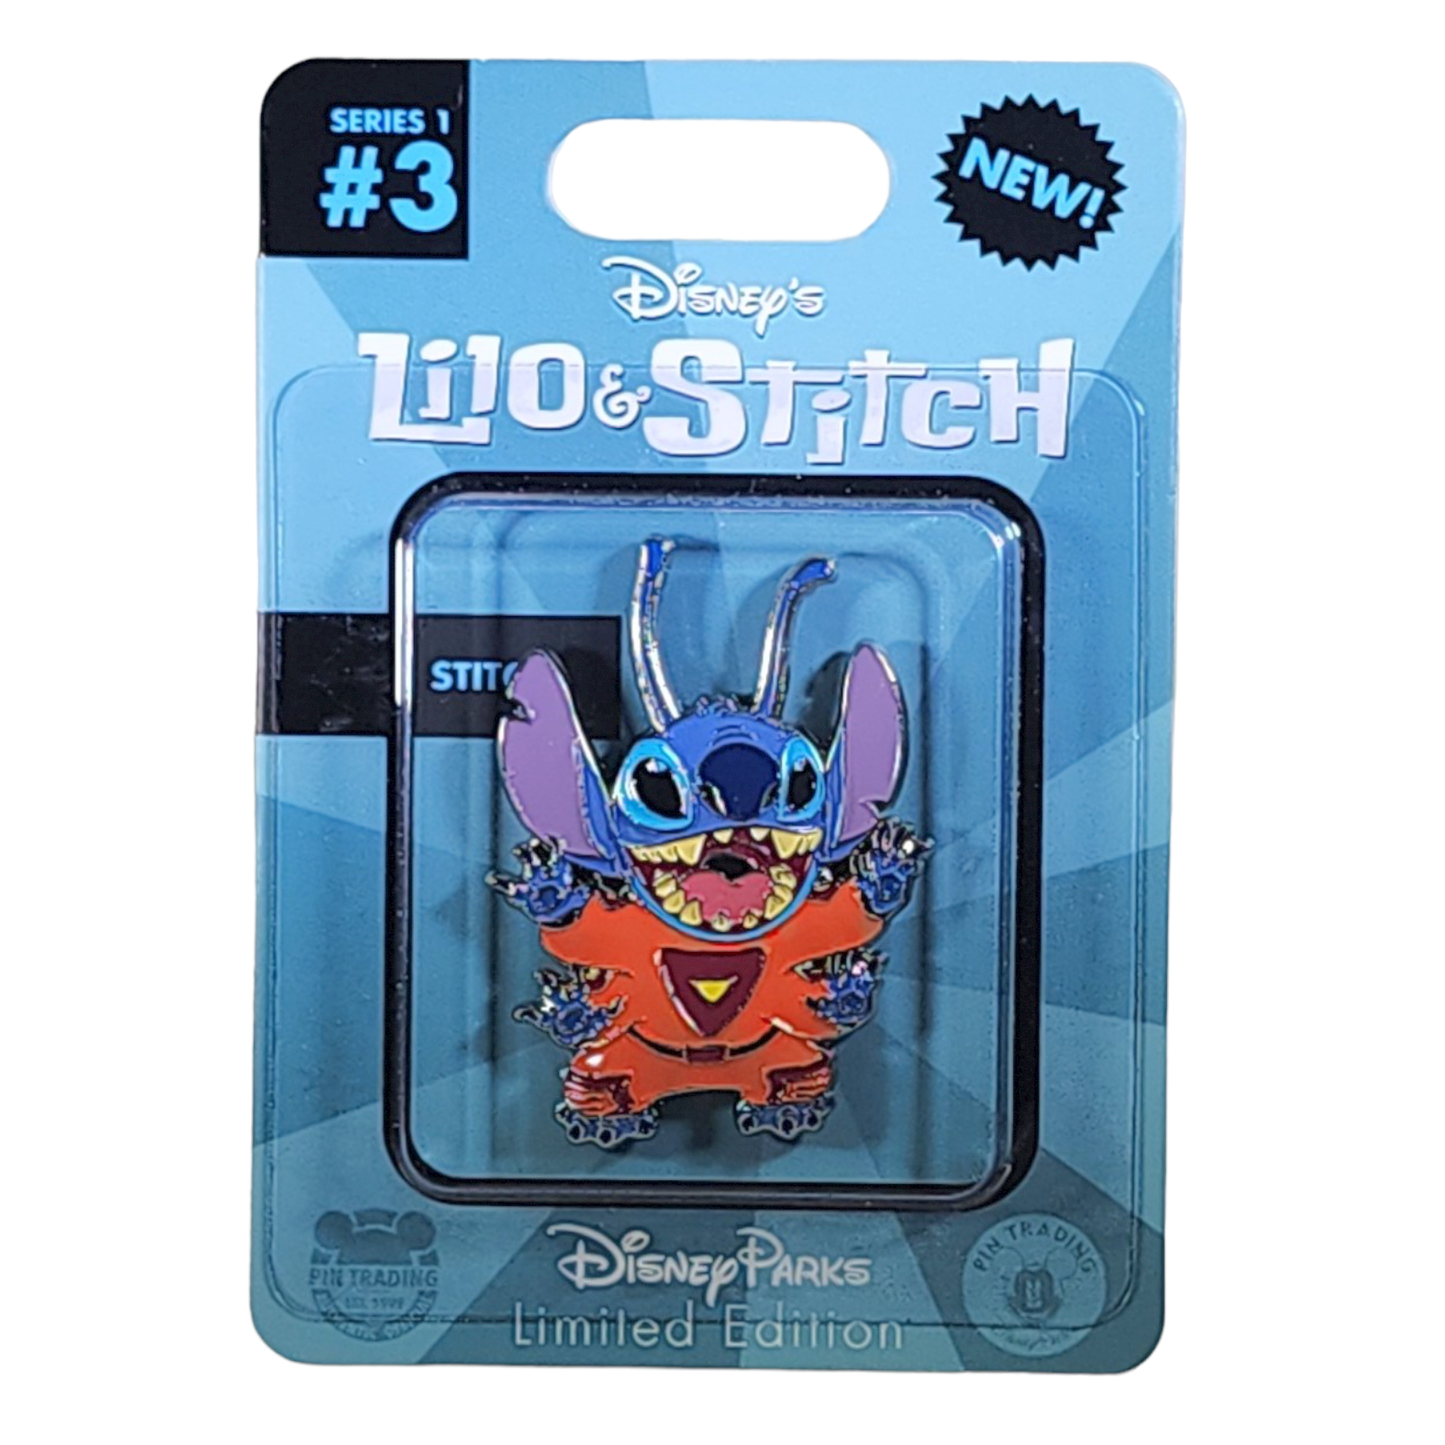 Disney Stitch Pins pick and choose $3 and up - collectibles - by owner -  sale - craigslist